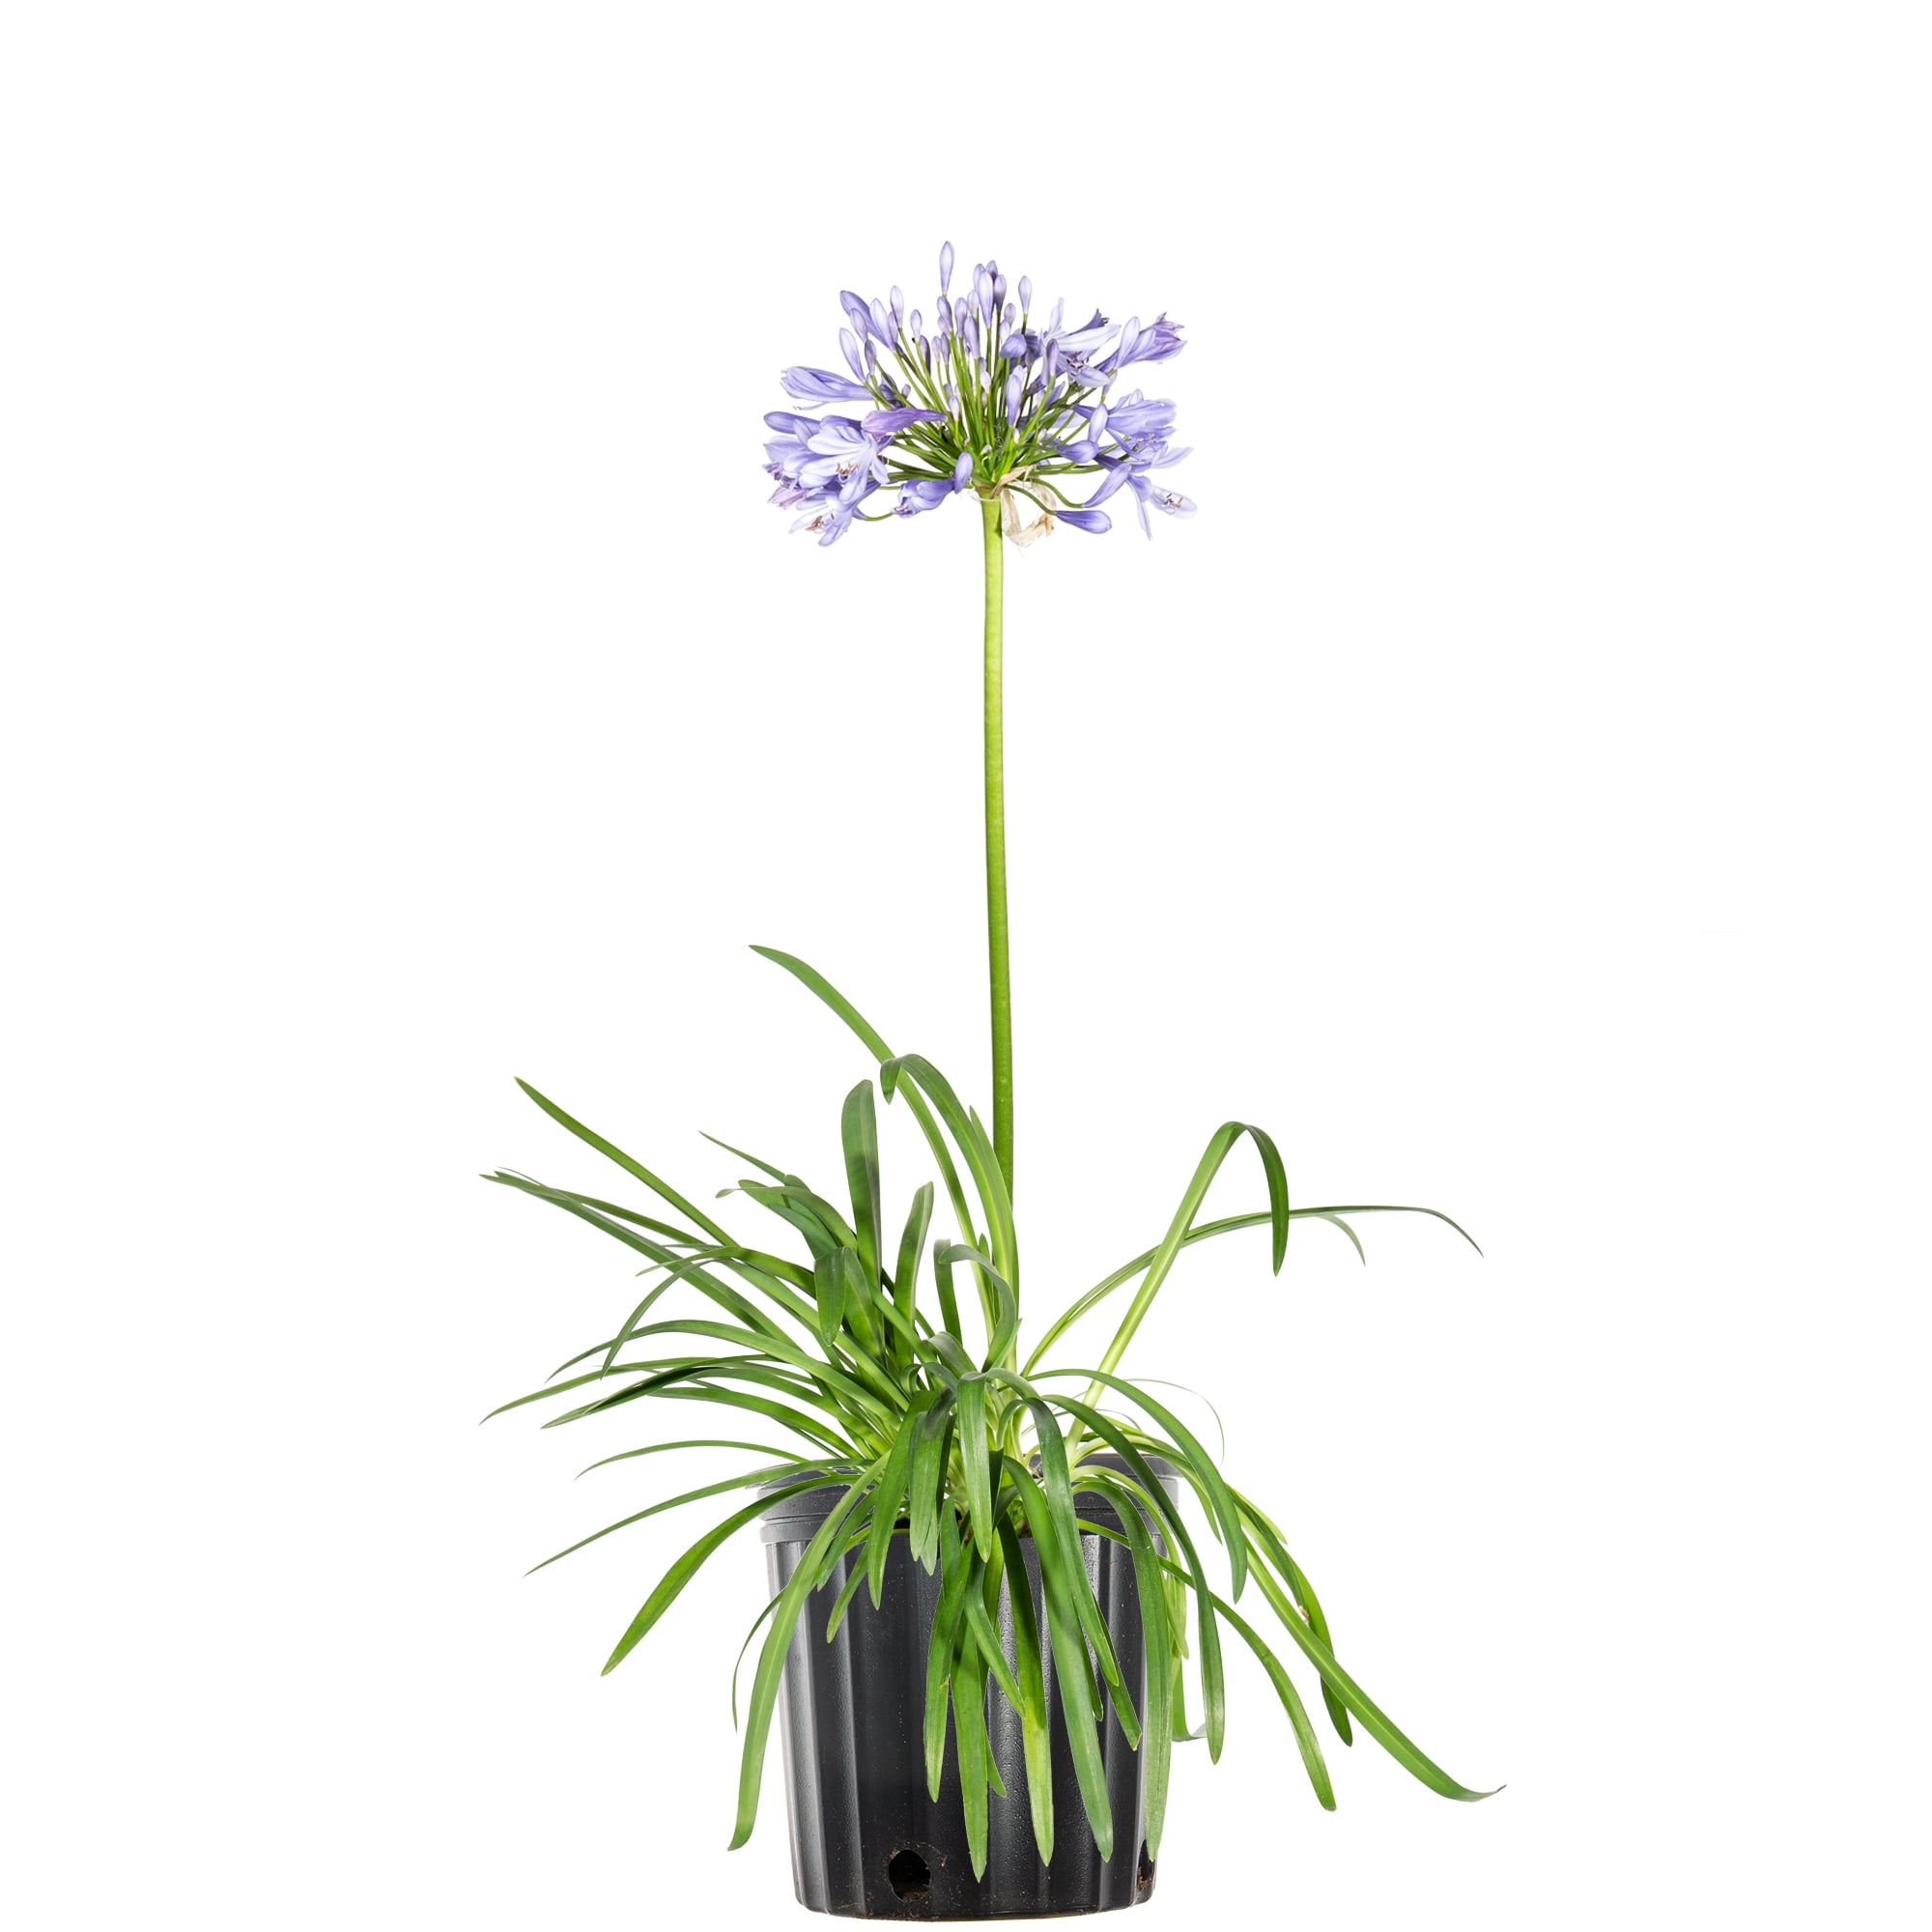 1 Gal. Blue Agapanthus - Lily of the Nile - Evergreen